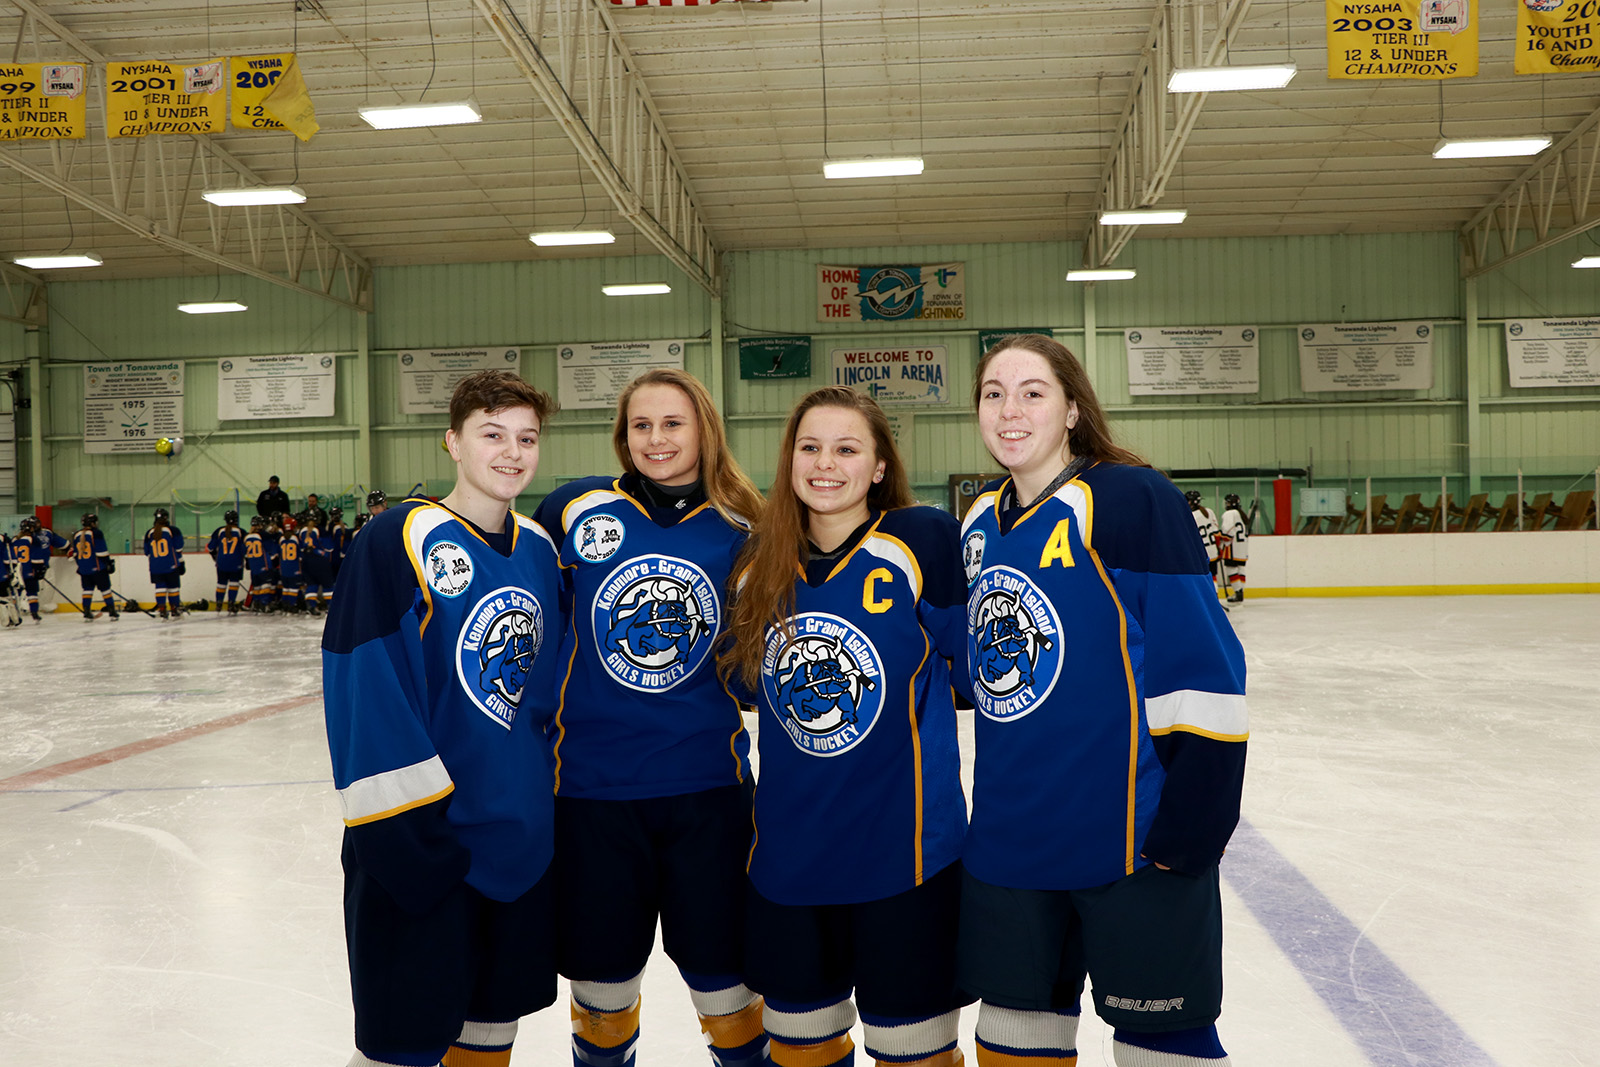 PWHL Providing Opportunity For Local Hockey Players – Chatham-Kent